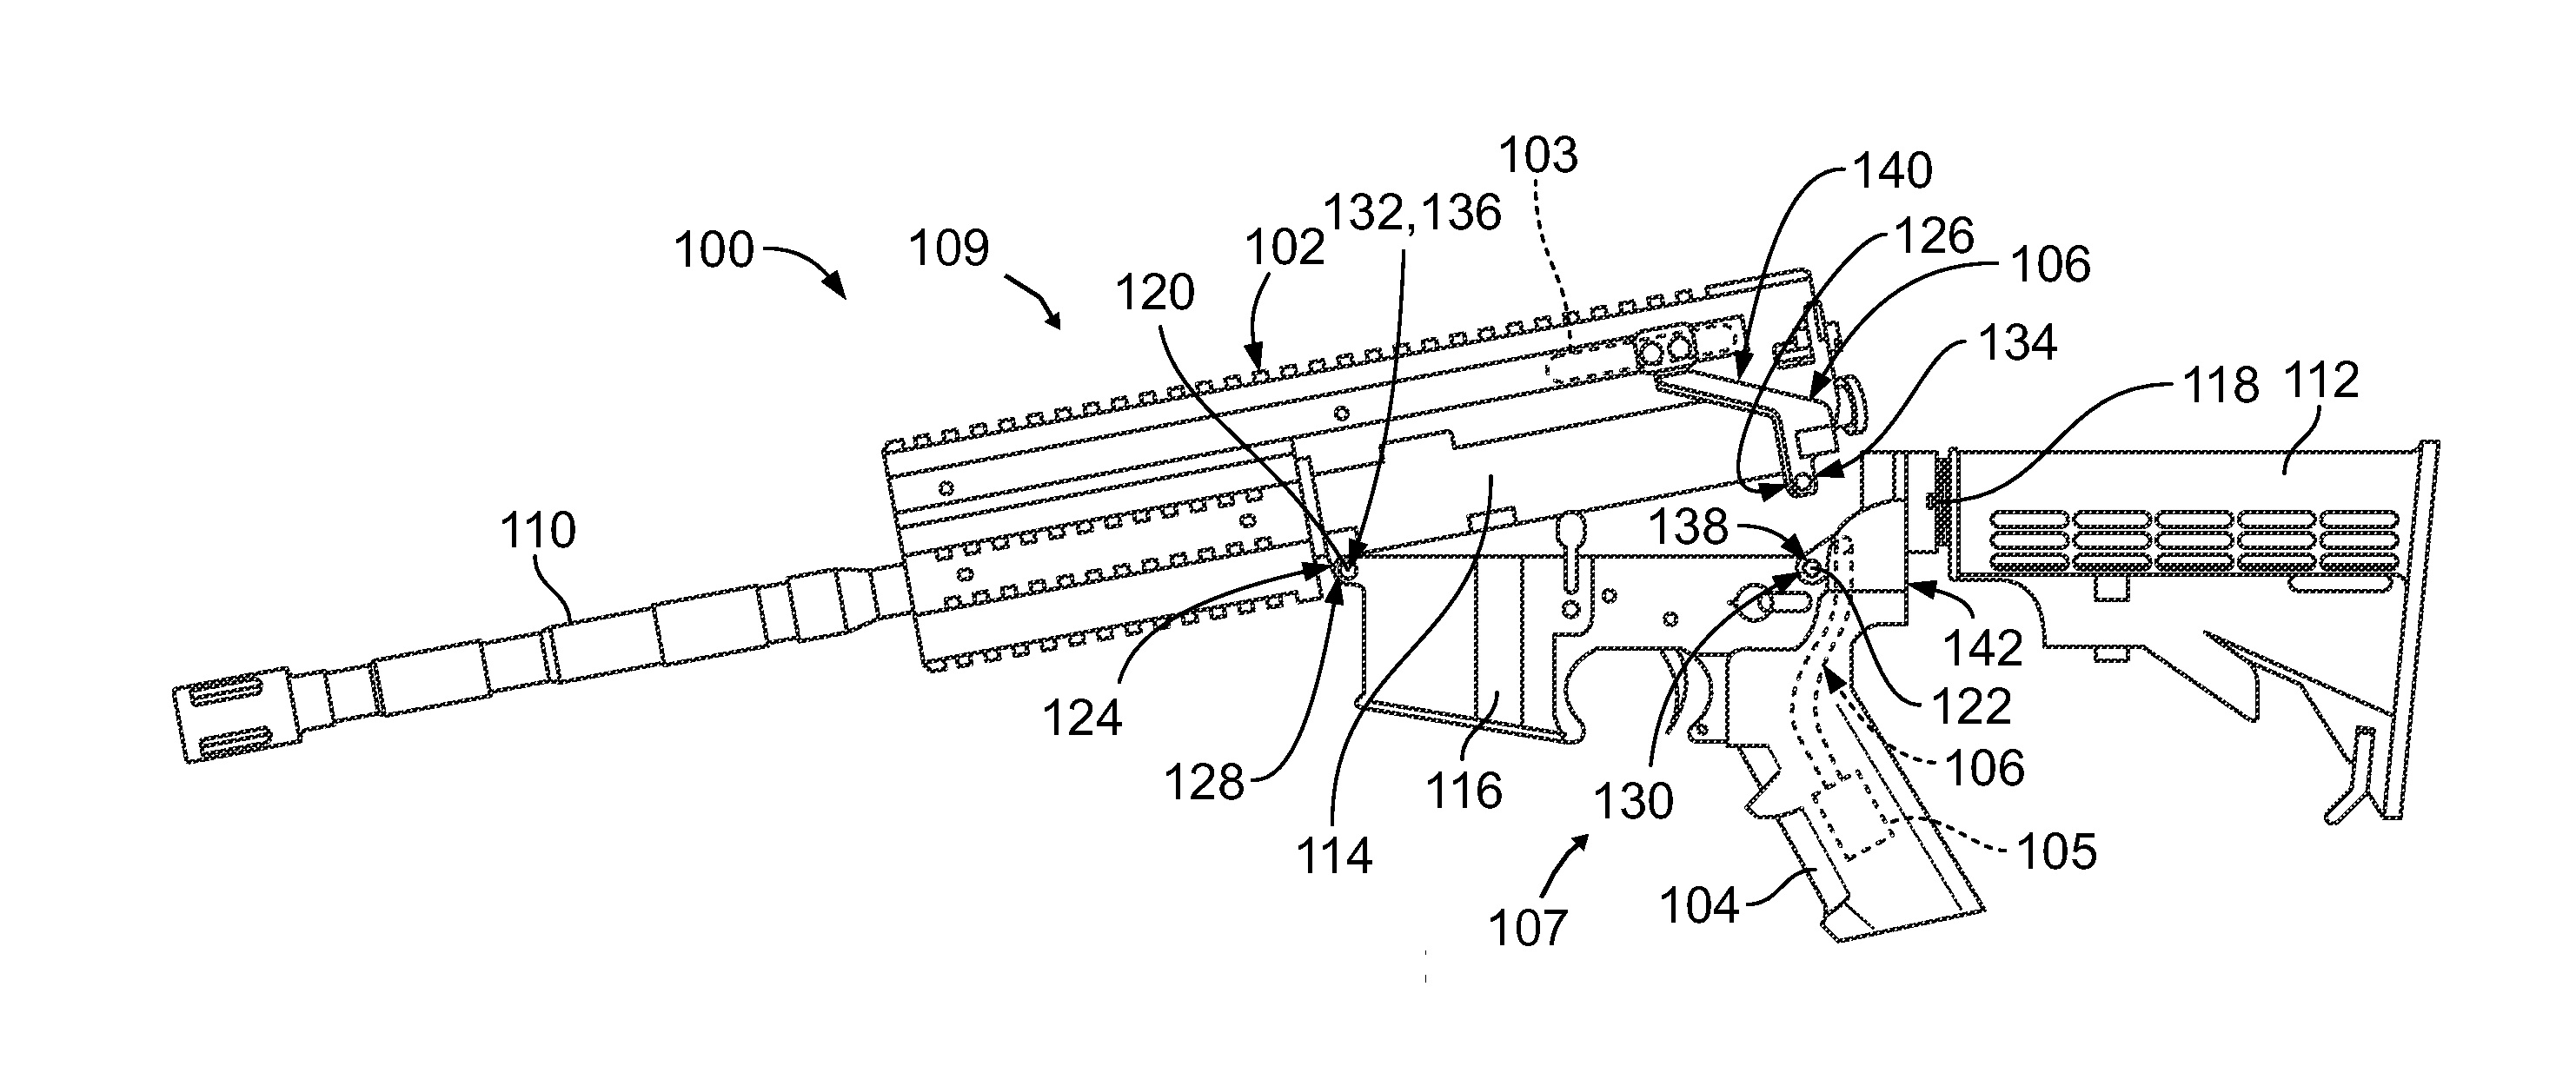 Communication connector system for a weapon